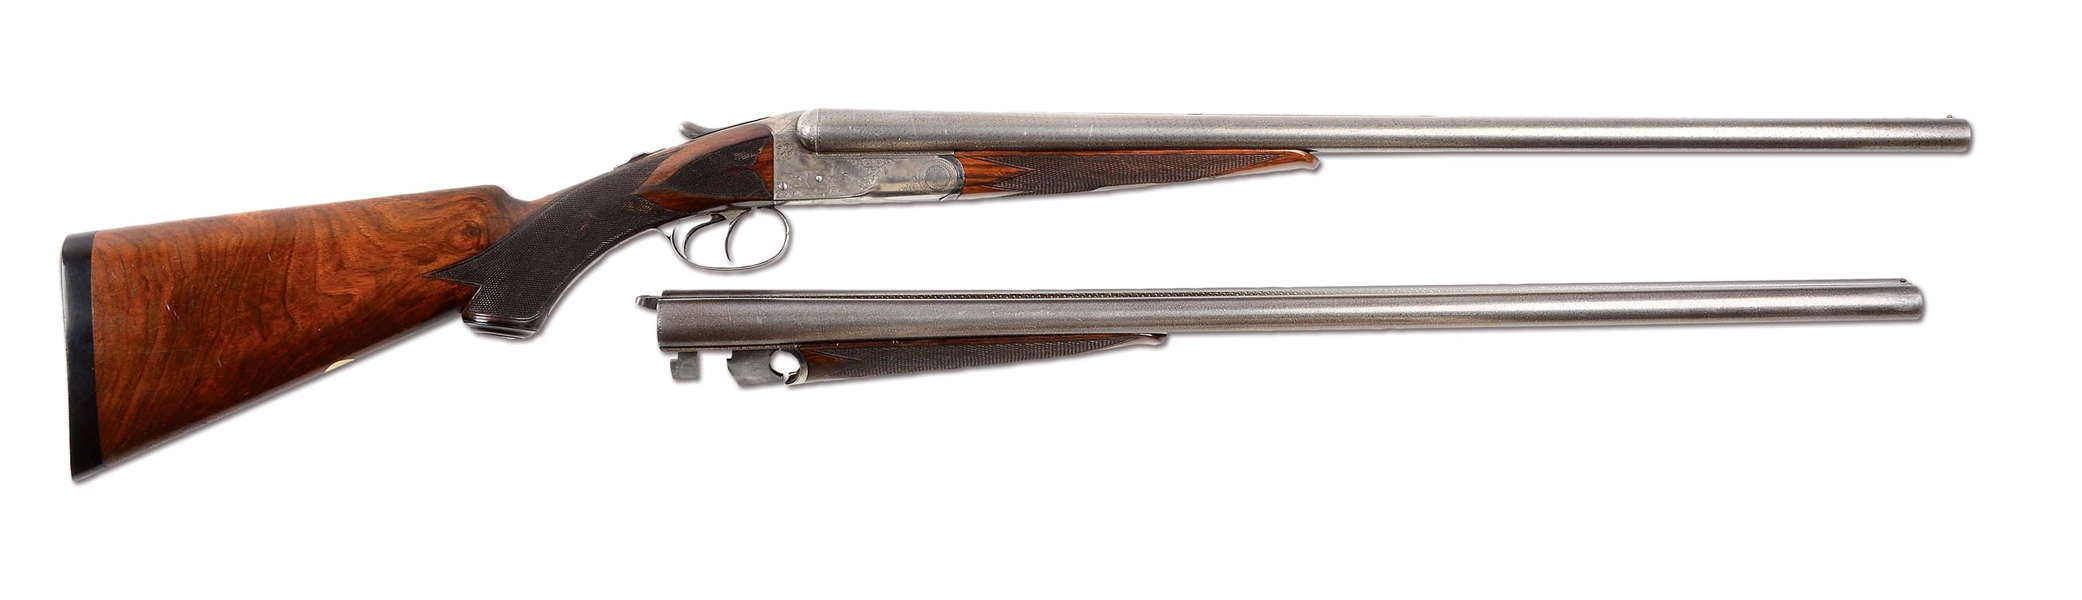 (A) CASED DELUXE FACTORY ENGRAVED COLT MODEL 1883 HAMMERLESS BOXLOCK SHOTGUN WITH 2 BARRELS (1894).